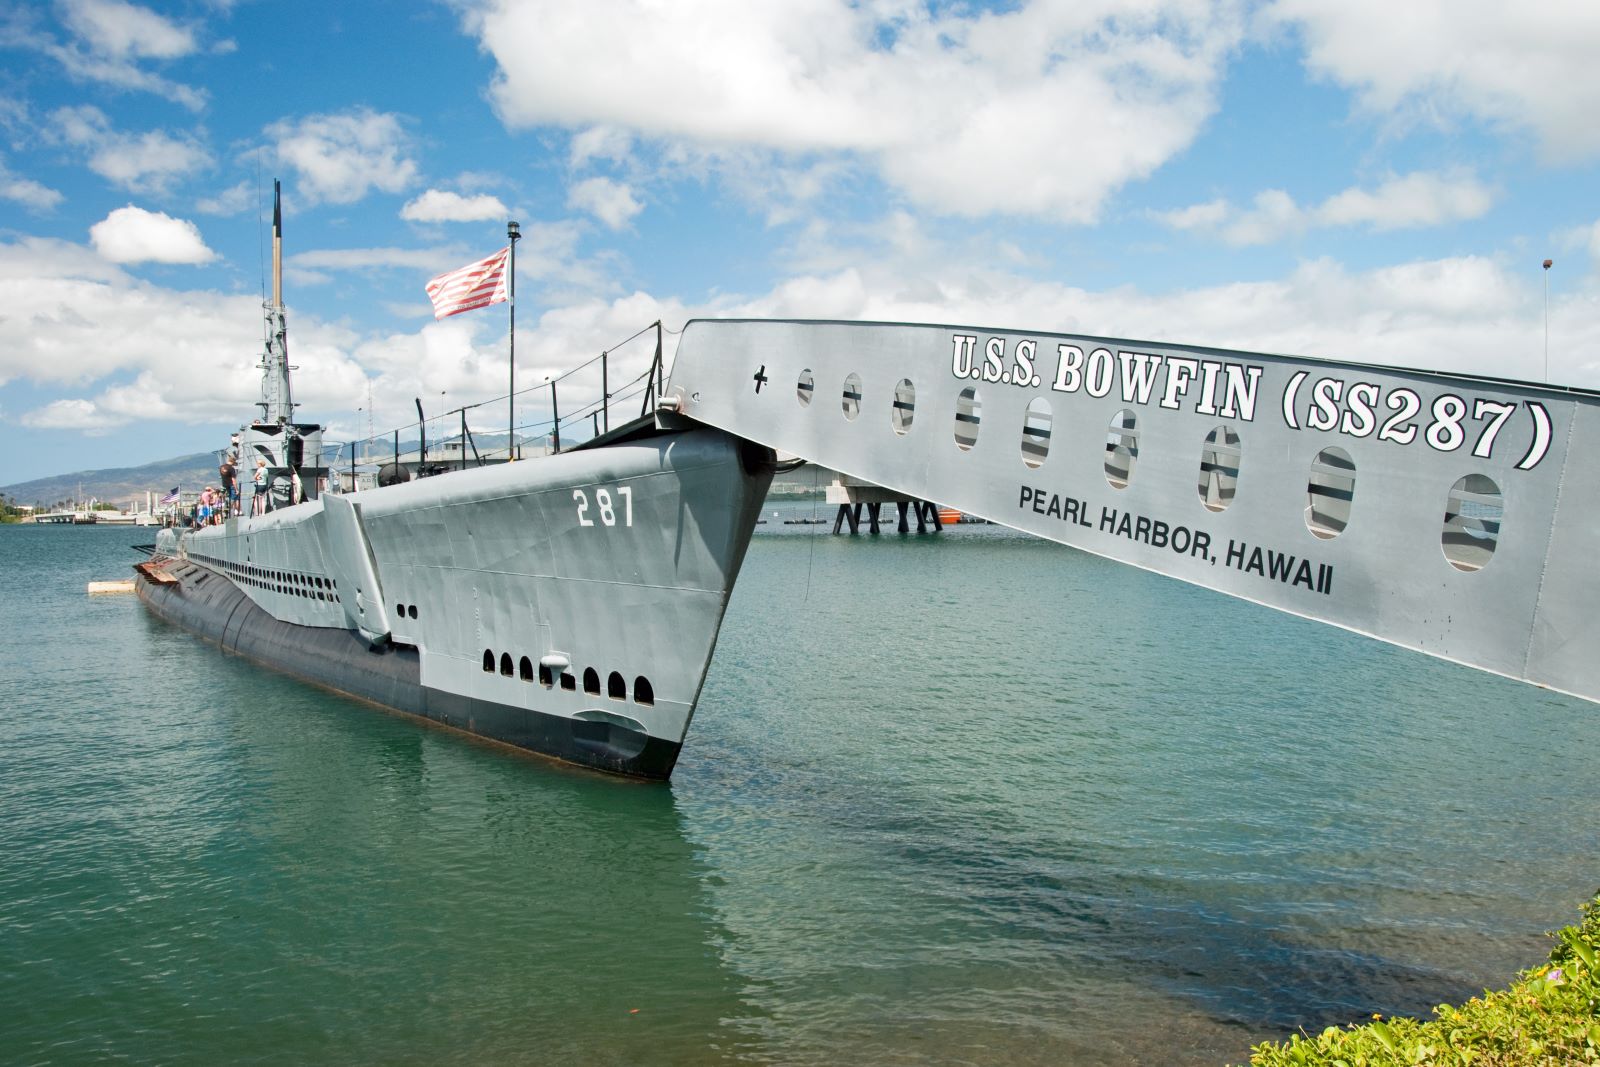 Image credit: Shutterstock / Vacclav <p>Explore the USS Bowfin, known as the “Pearl Harbor Avenger,” which played a crucial role in the Pacific submarine campaign after the attack.</p>